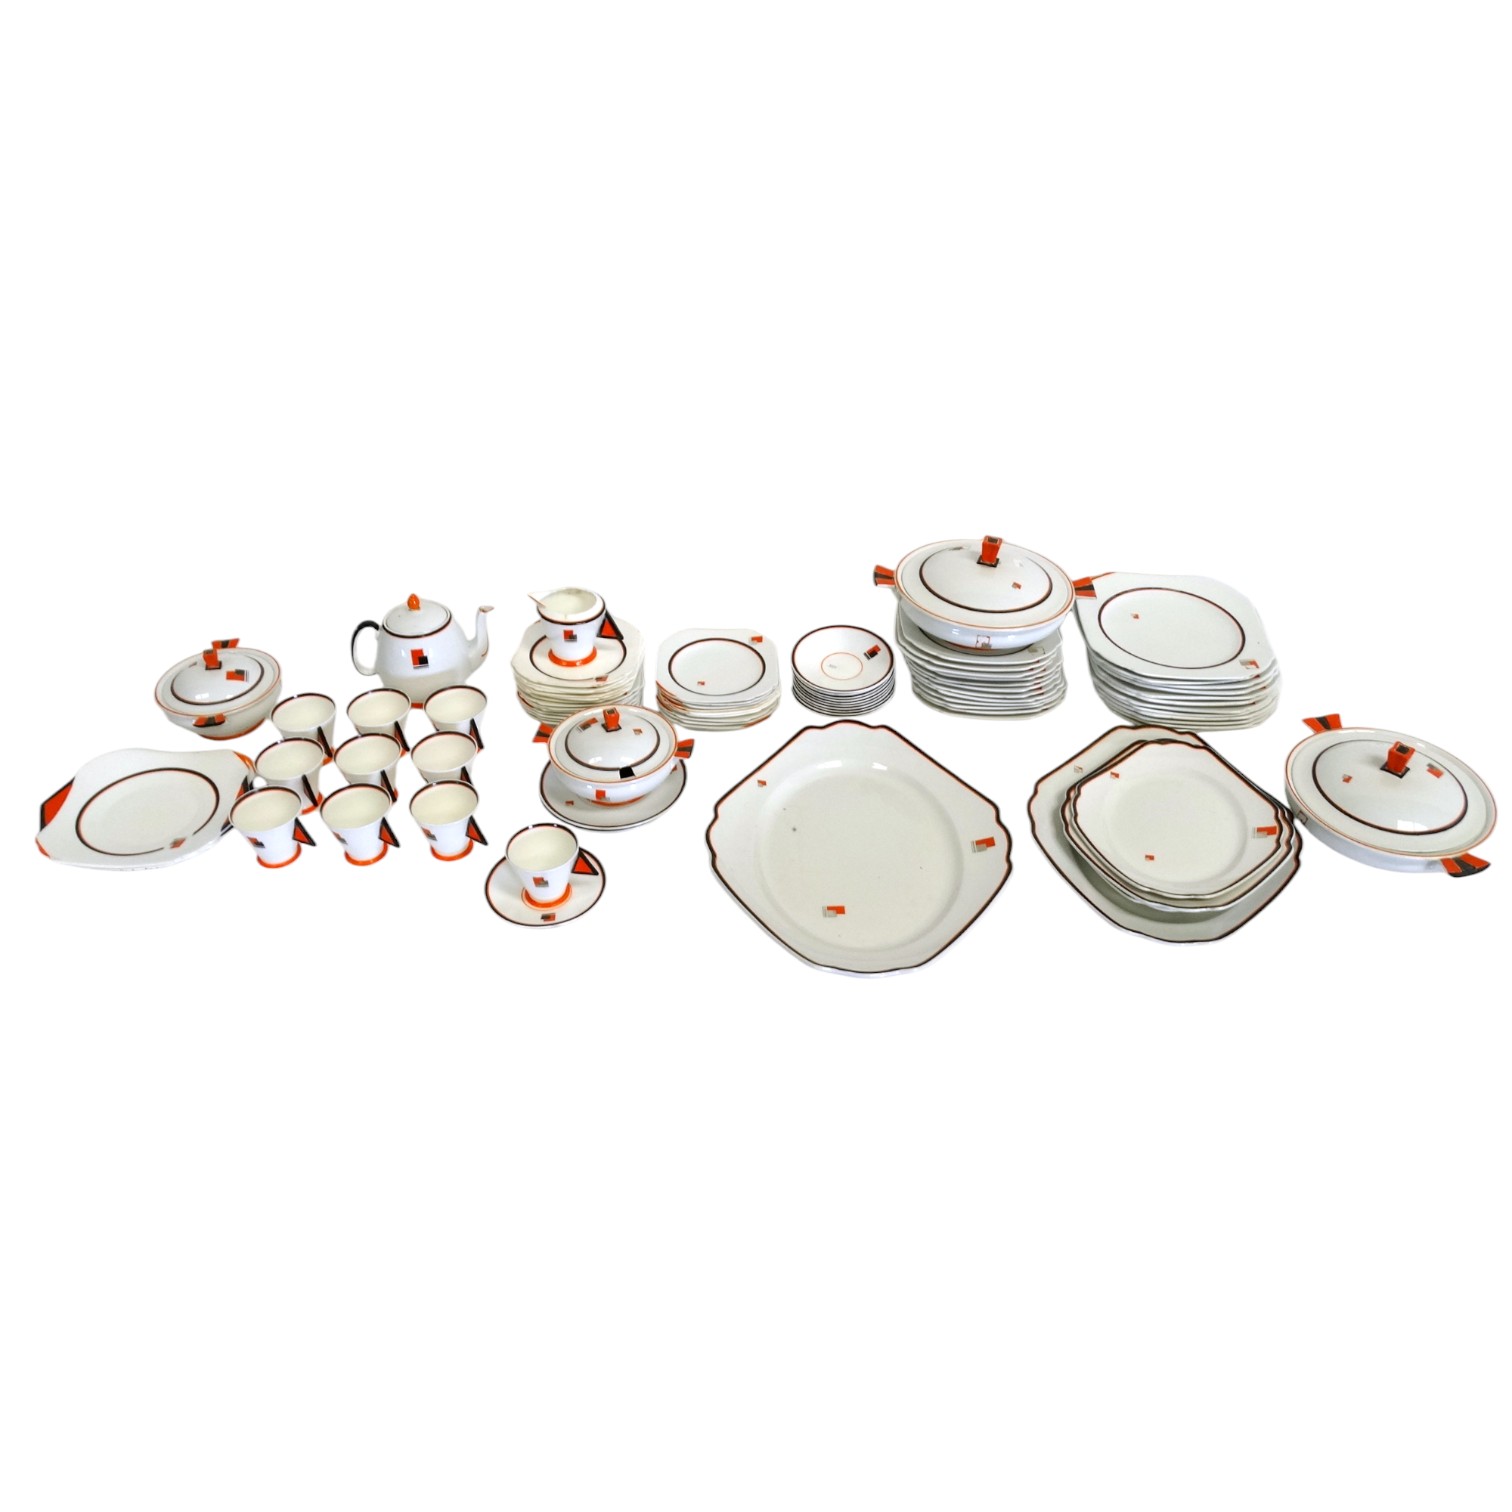 An extensive Shelley Art Deco dinner and tea service - decorated in orange and black on a white